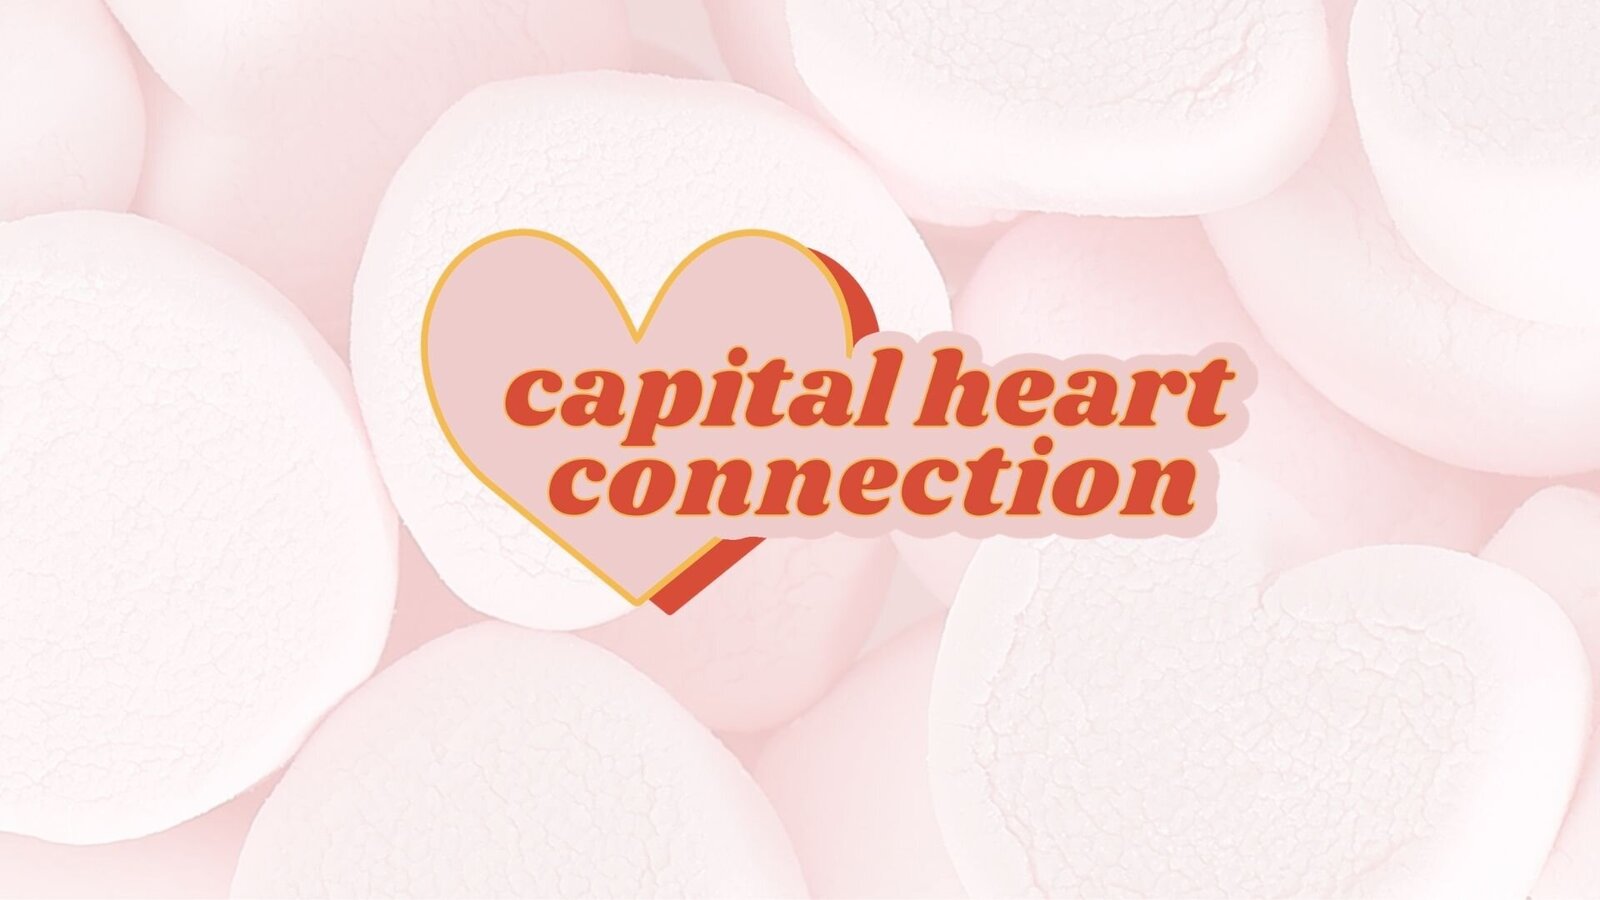 Captial Heart Connection Branding Overview